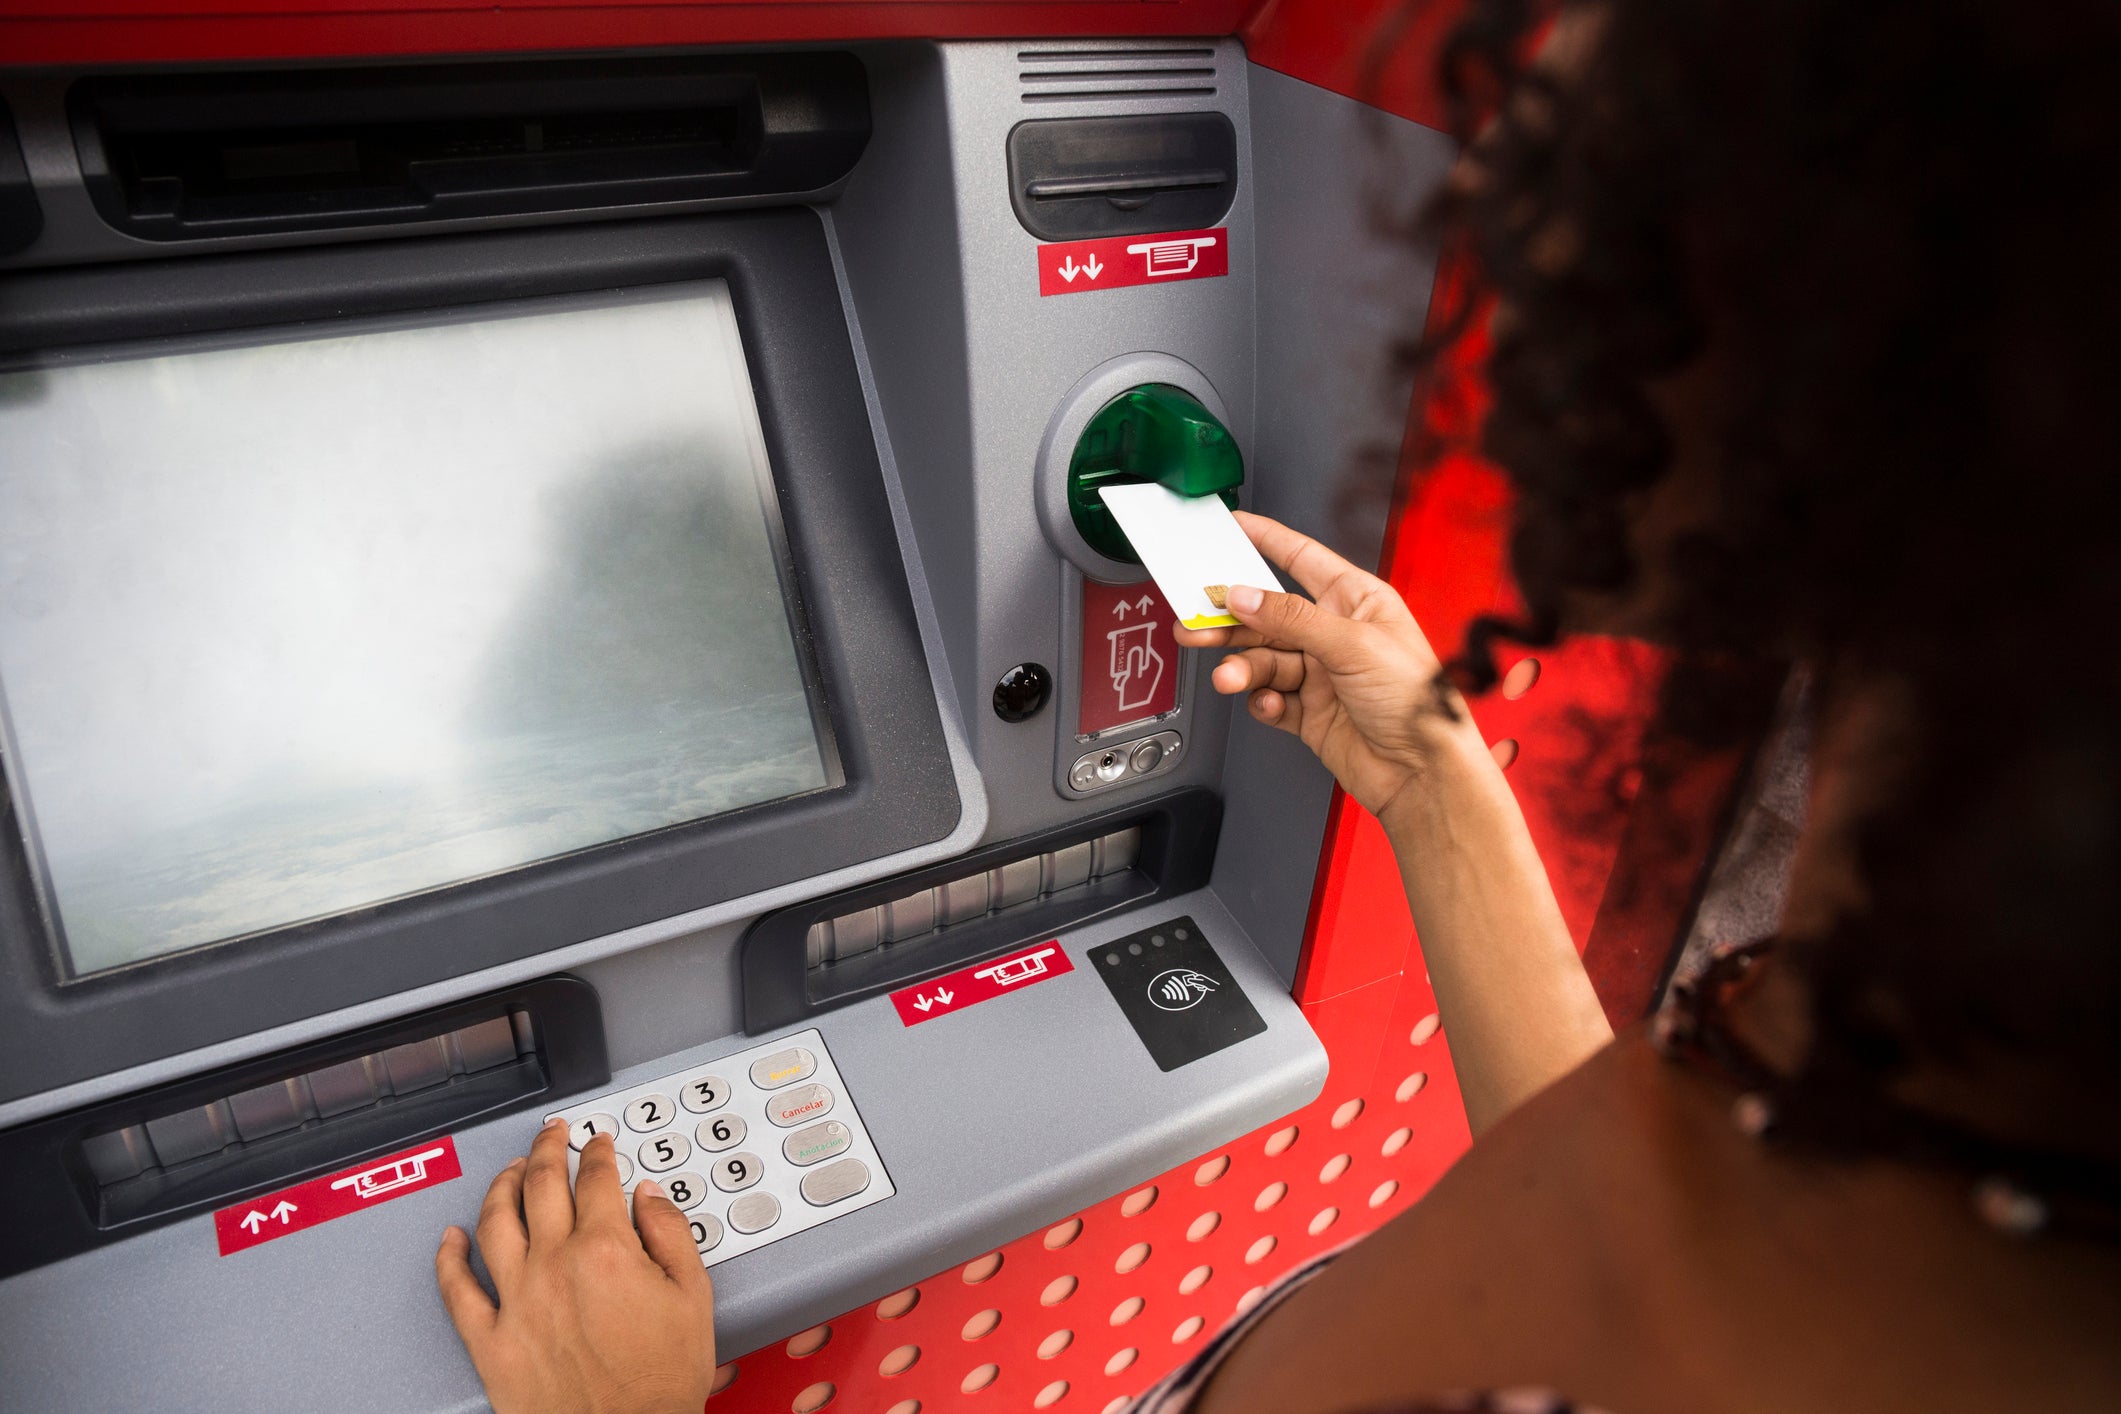 ATM Fees Have Increased For The First Time In Years